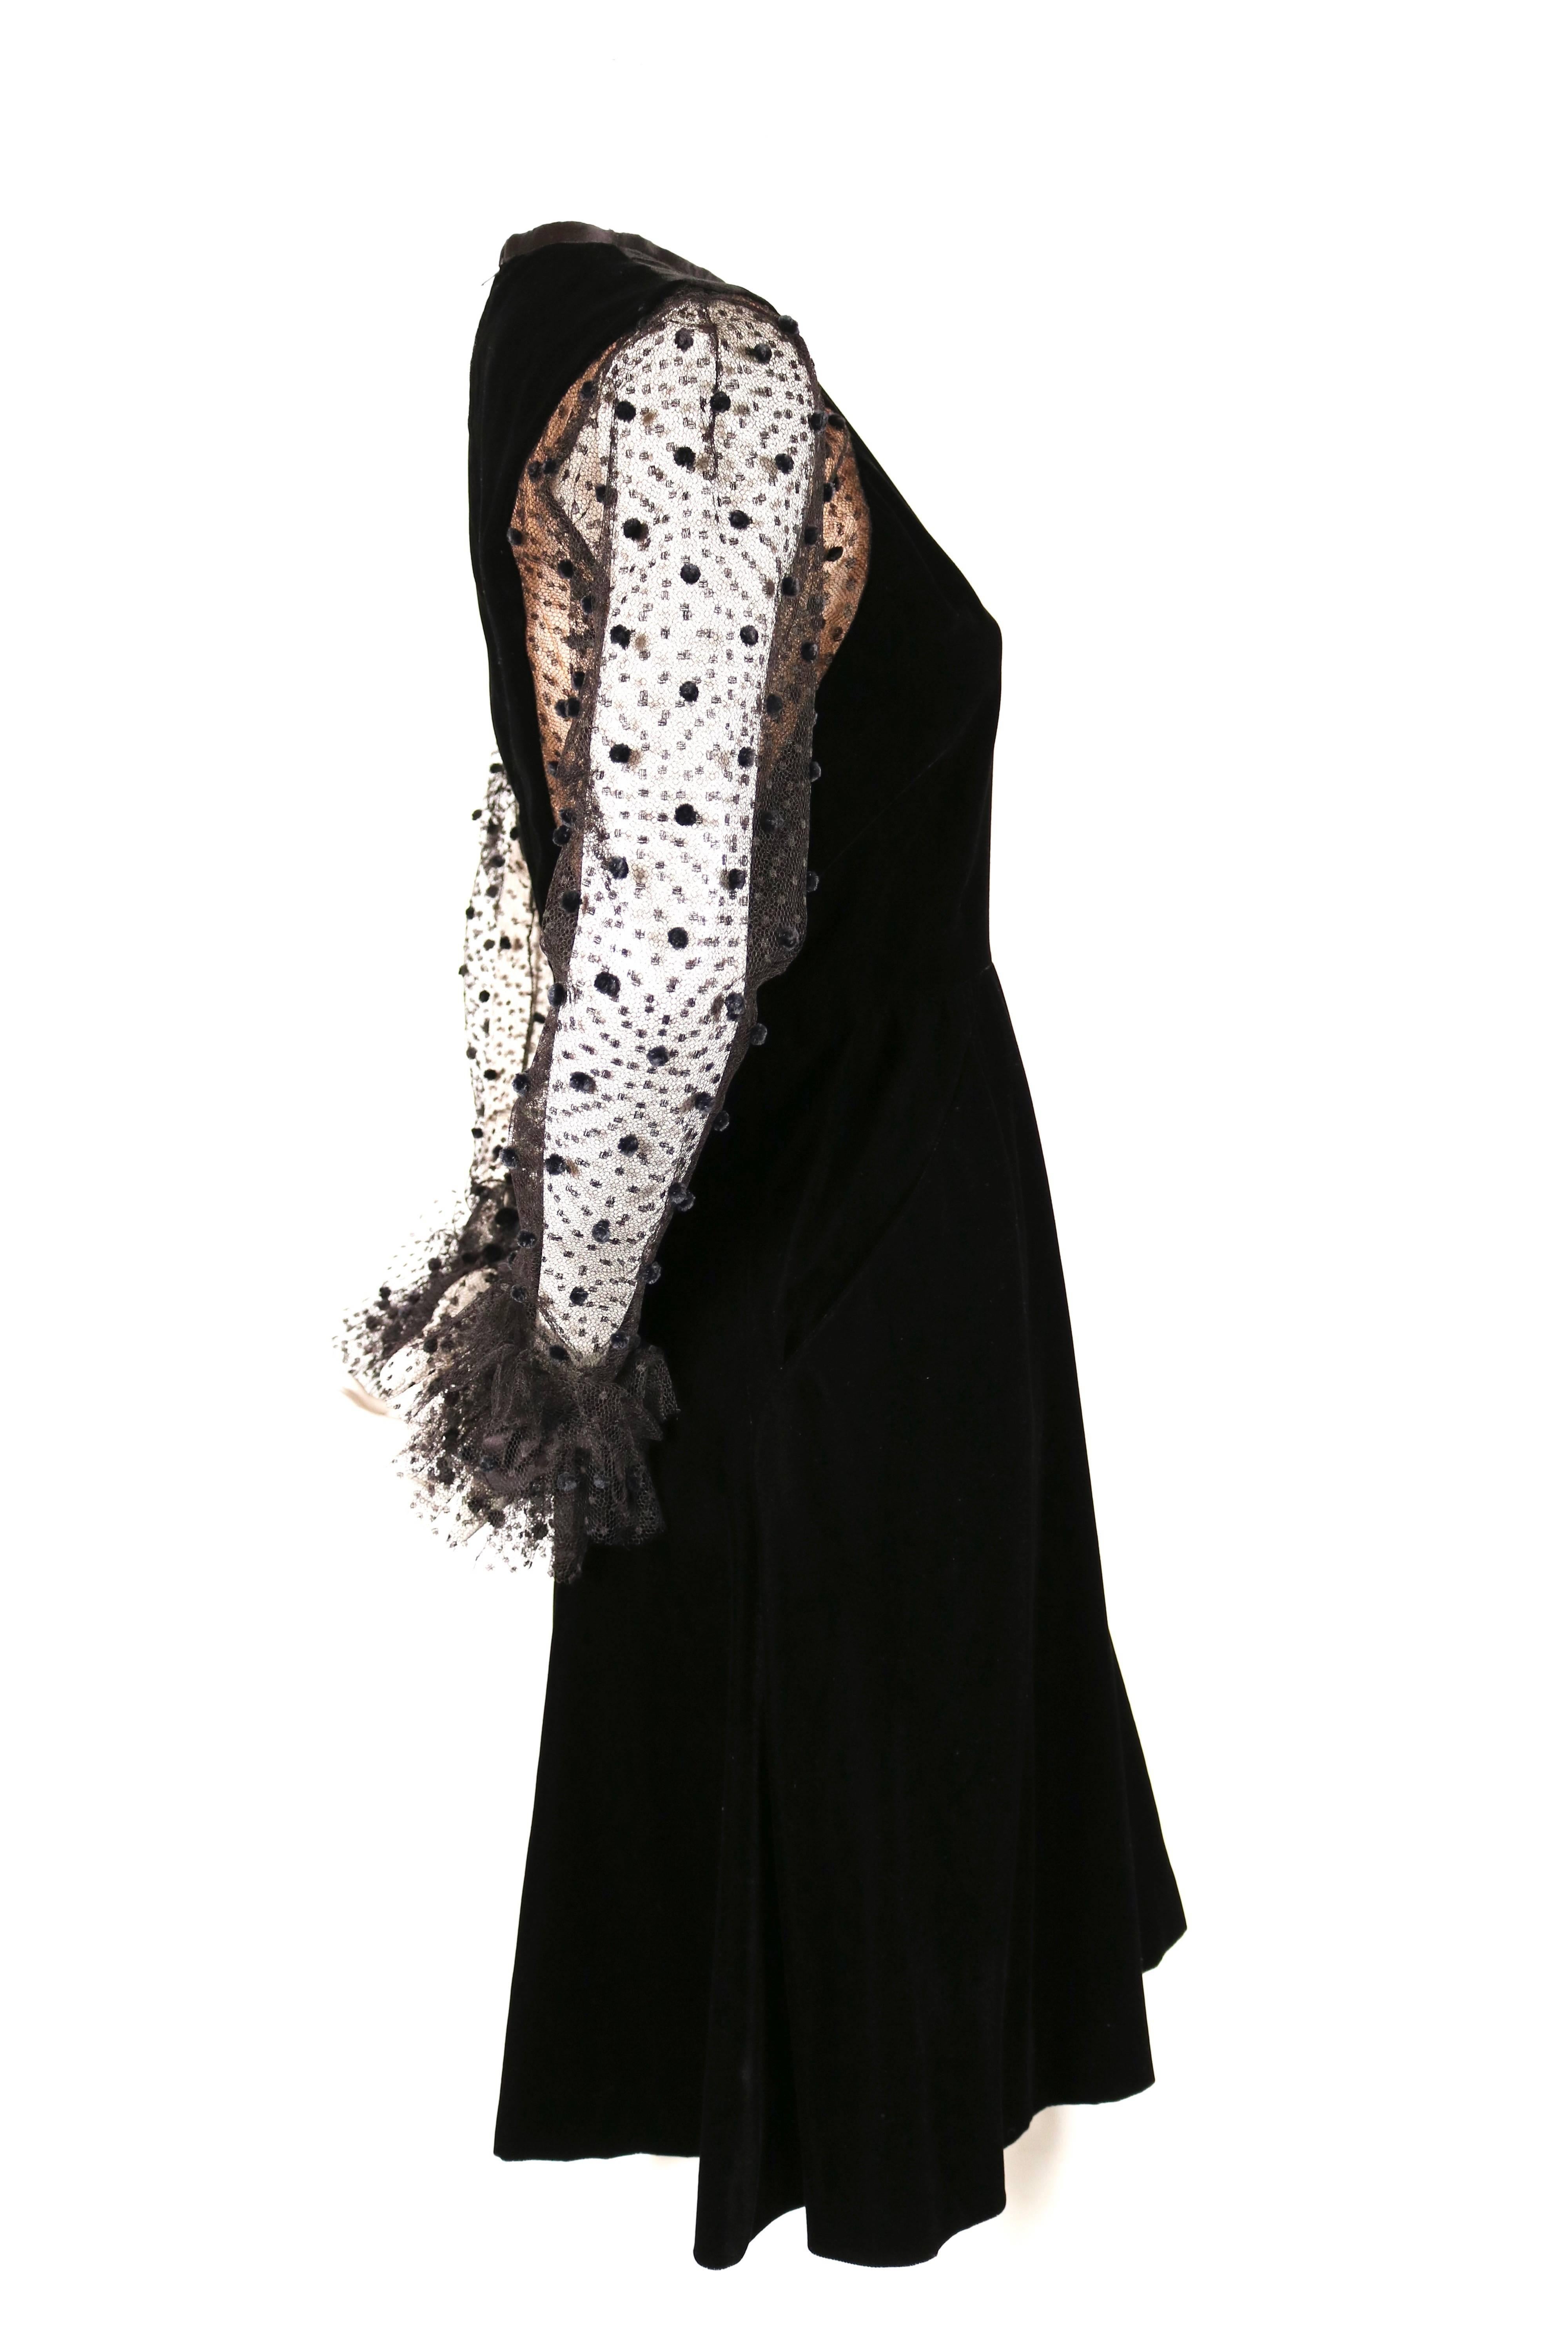 Jacqueline De Ribes black velvet and tulle dress, 1980s  In Good Condition For Sale In San Fransisco, CA